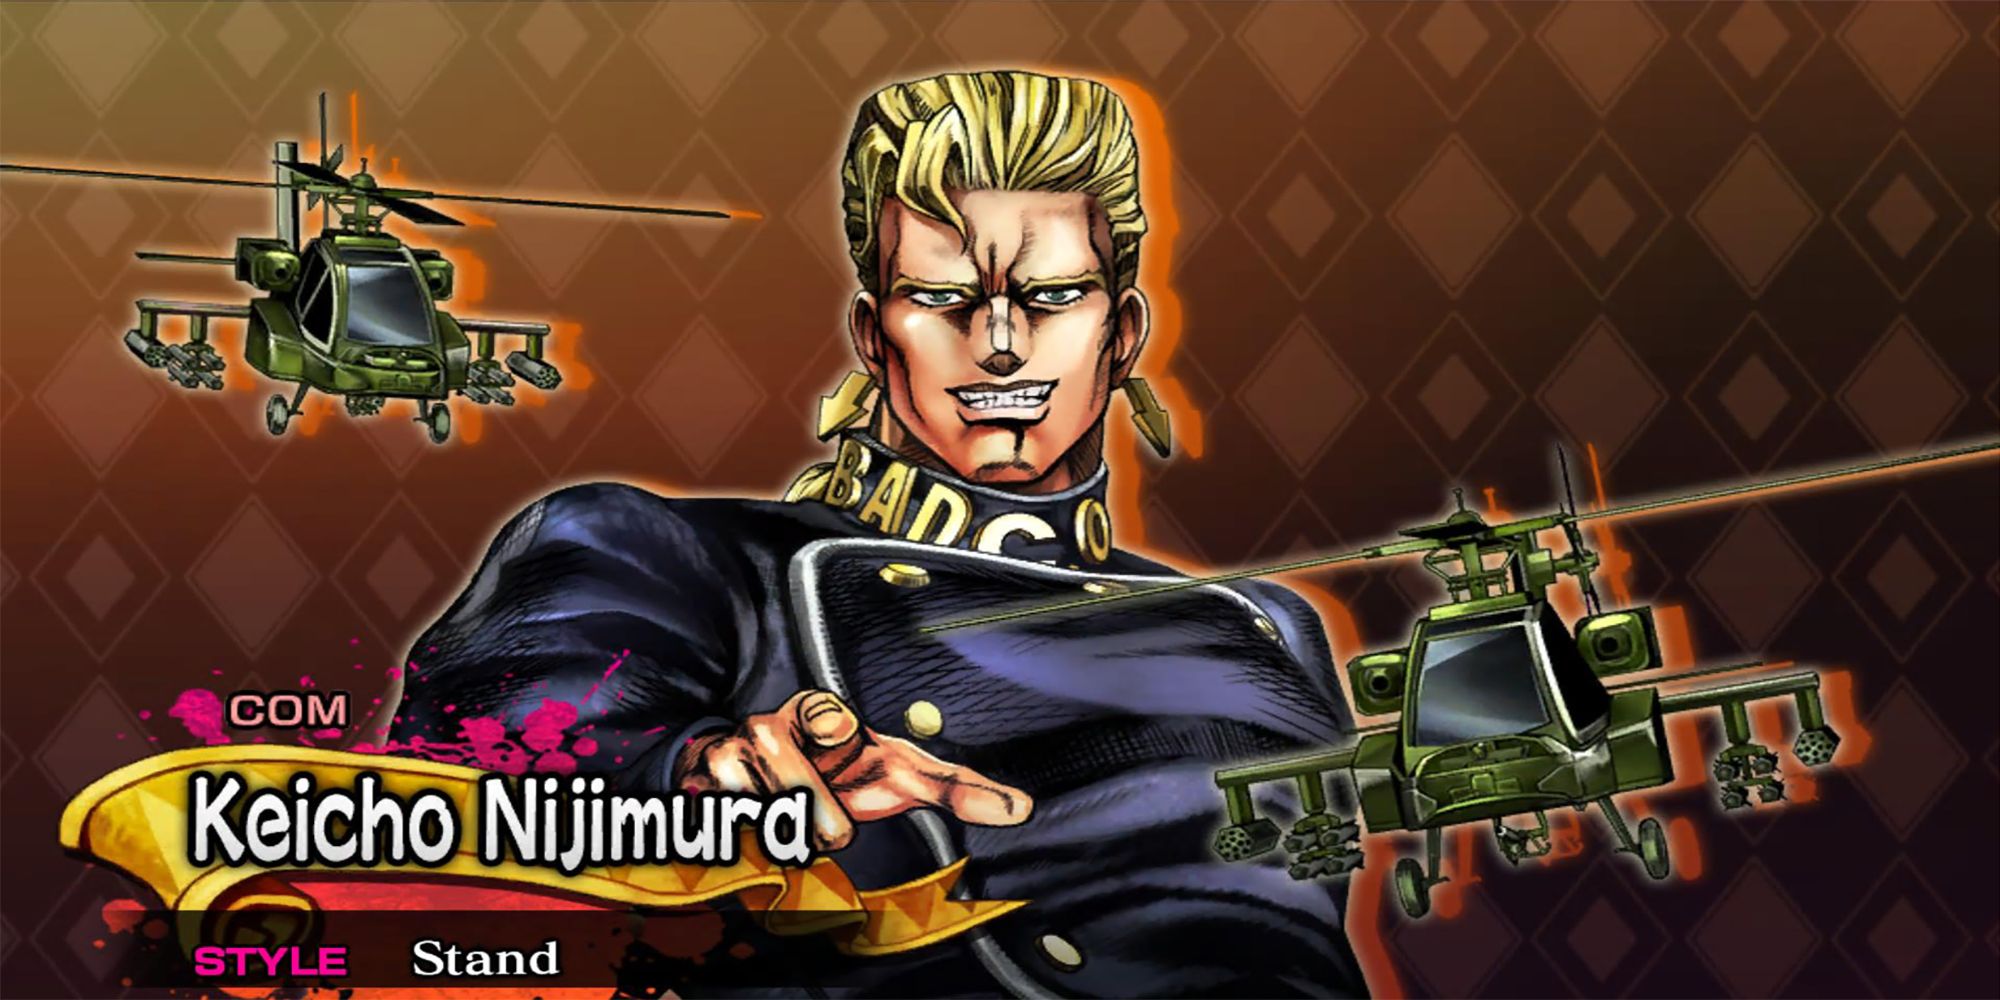 Keicho Nijimura is flanked by his Stand, Worse Company, on both sides in his character portrait from JoJo's Bizarre Adventure ASBR.